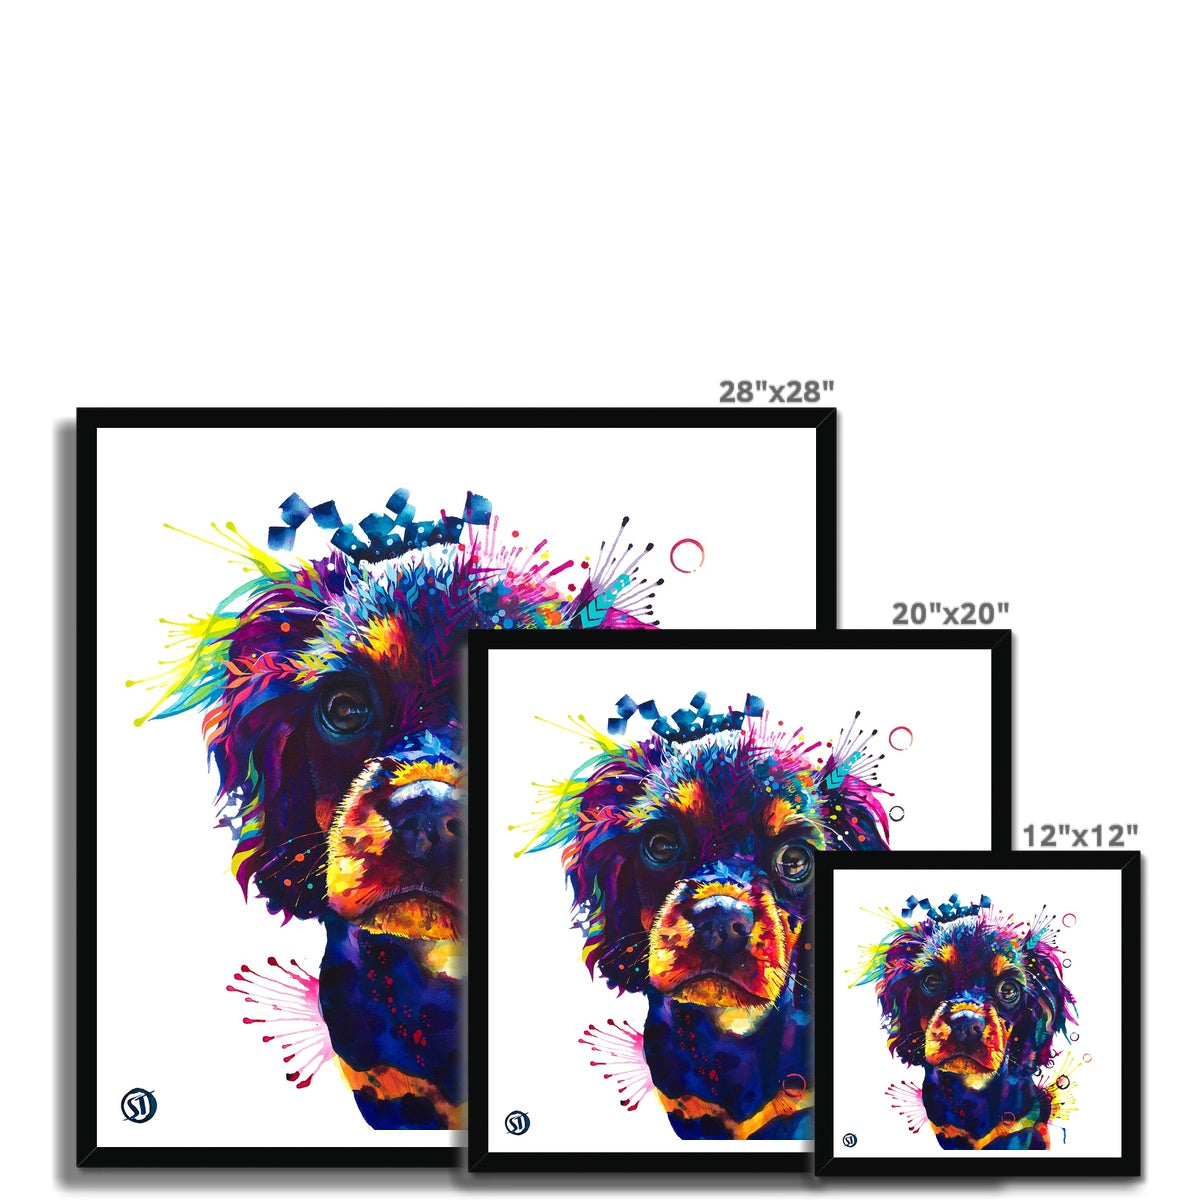 Cavalier King Charles Prints | Colourful Art Prints | Commission A Painting | Dog Drawings | Wall Prints